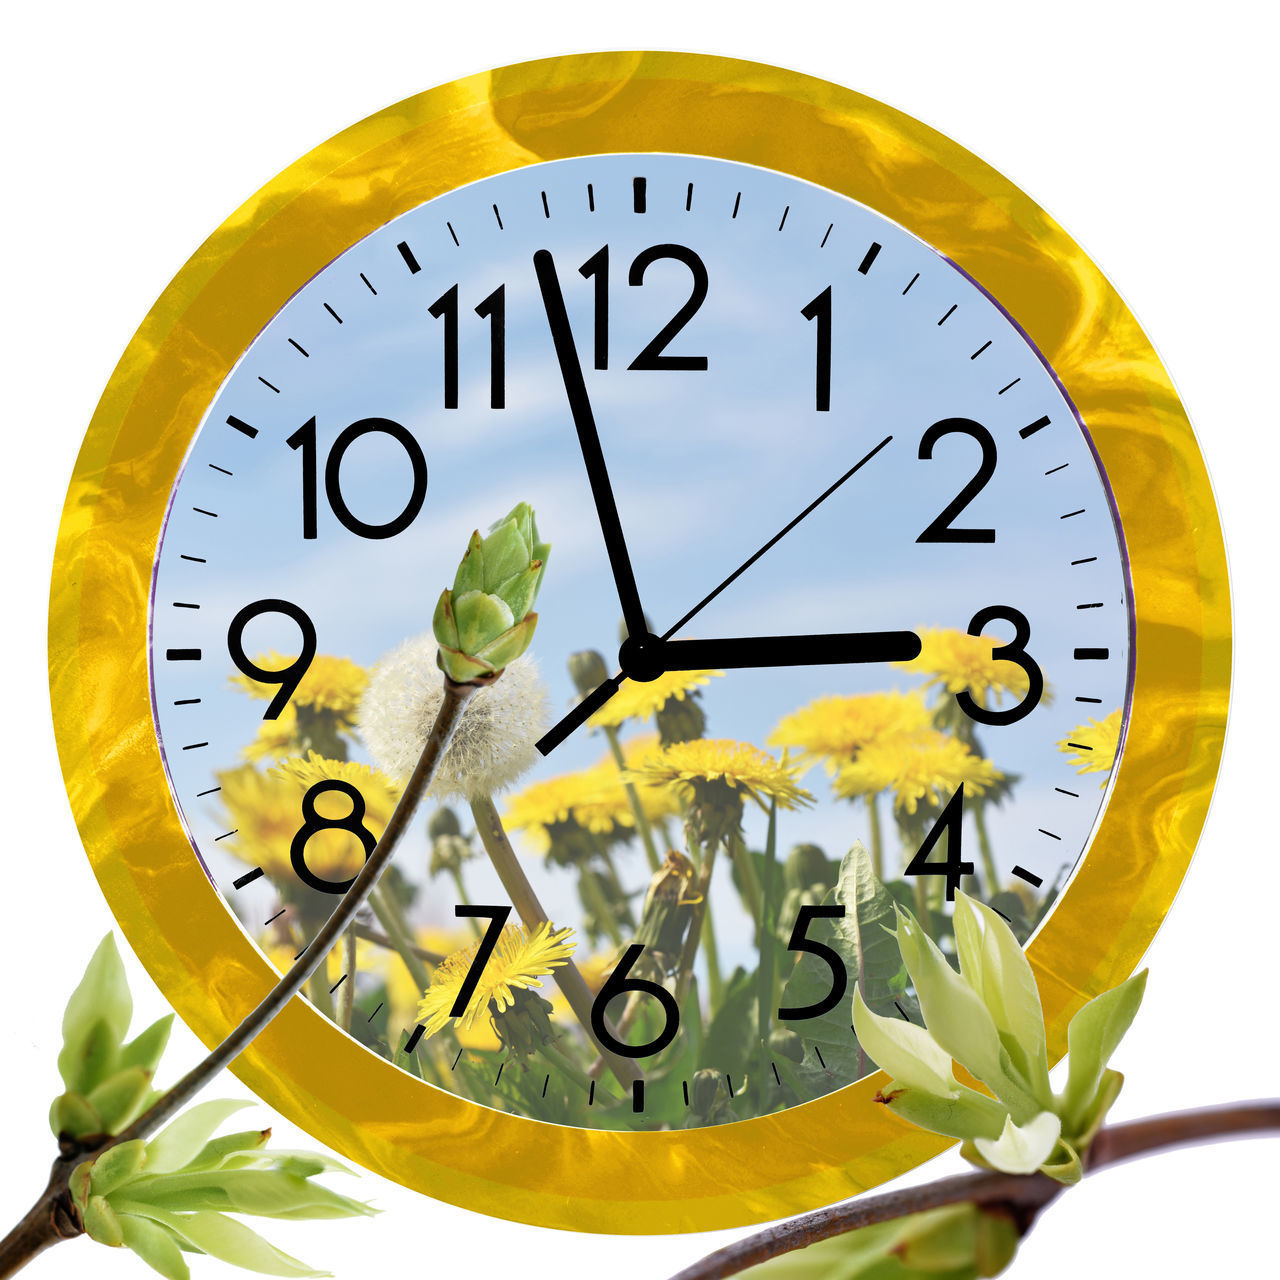 CLOSE-UP OF CLOCK ON YELLOW PAPER